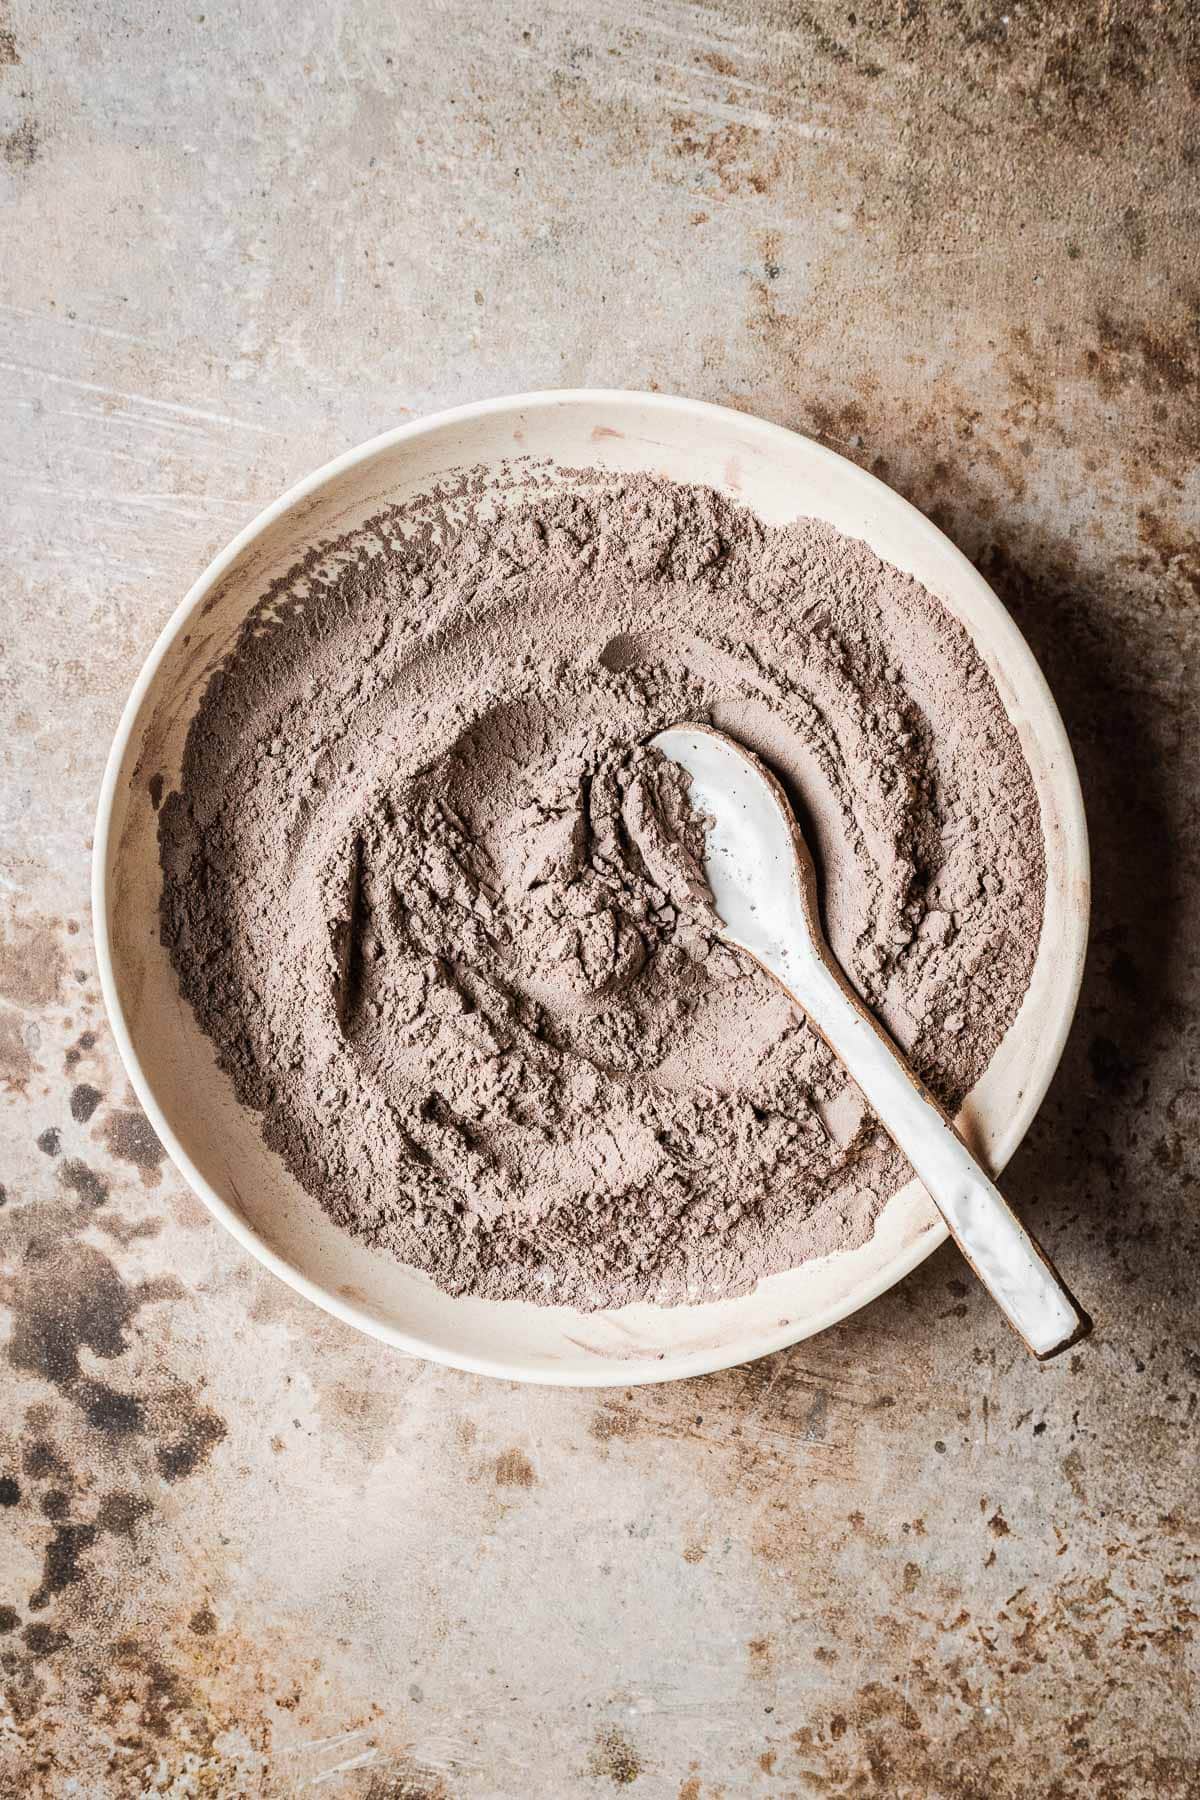 Sifted and mixed ingredients for chocolate cookies with cocoa powder in a tan bowl with a white ceramic spoon.